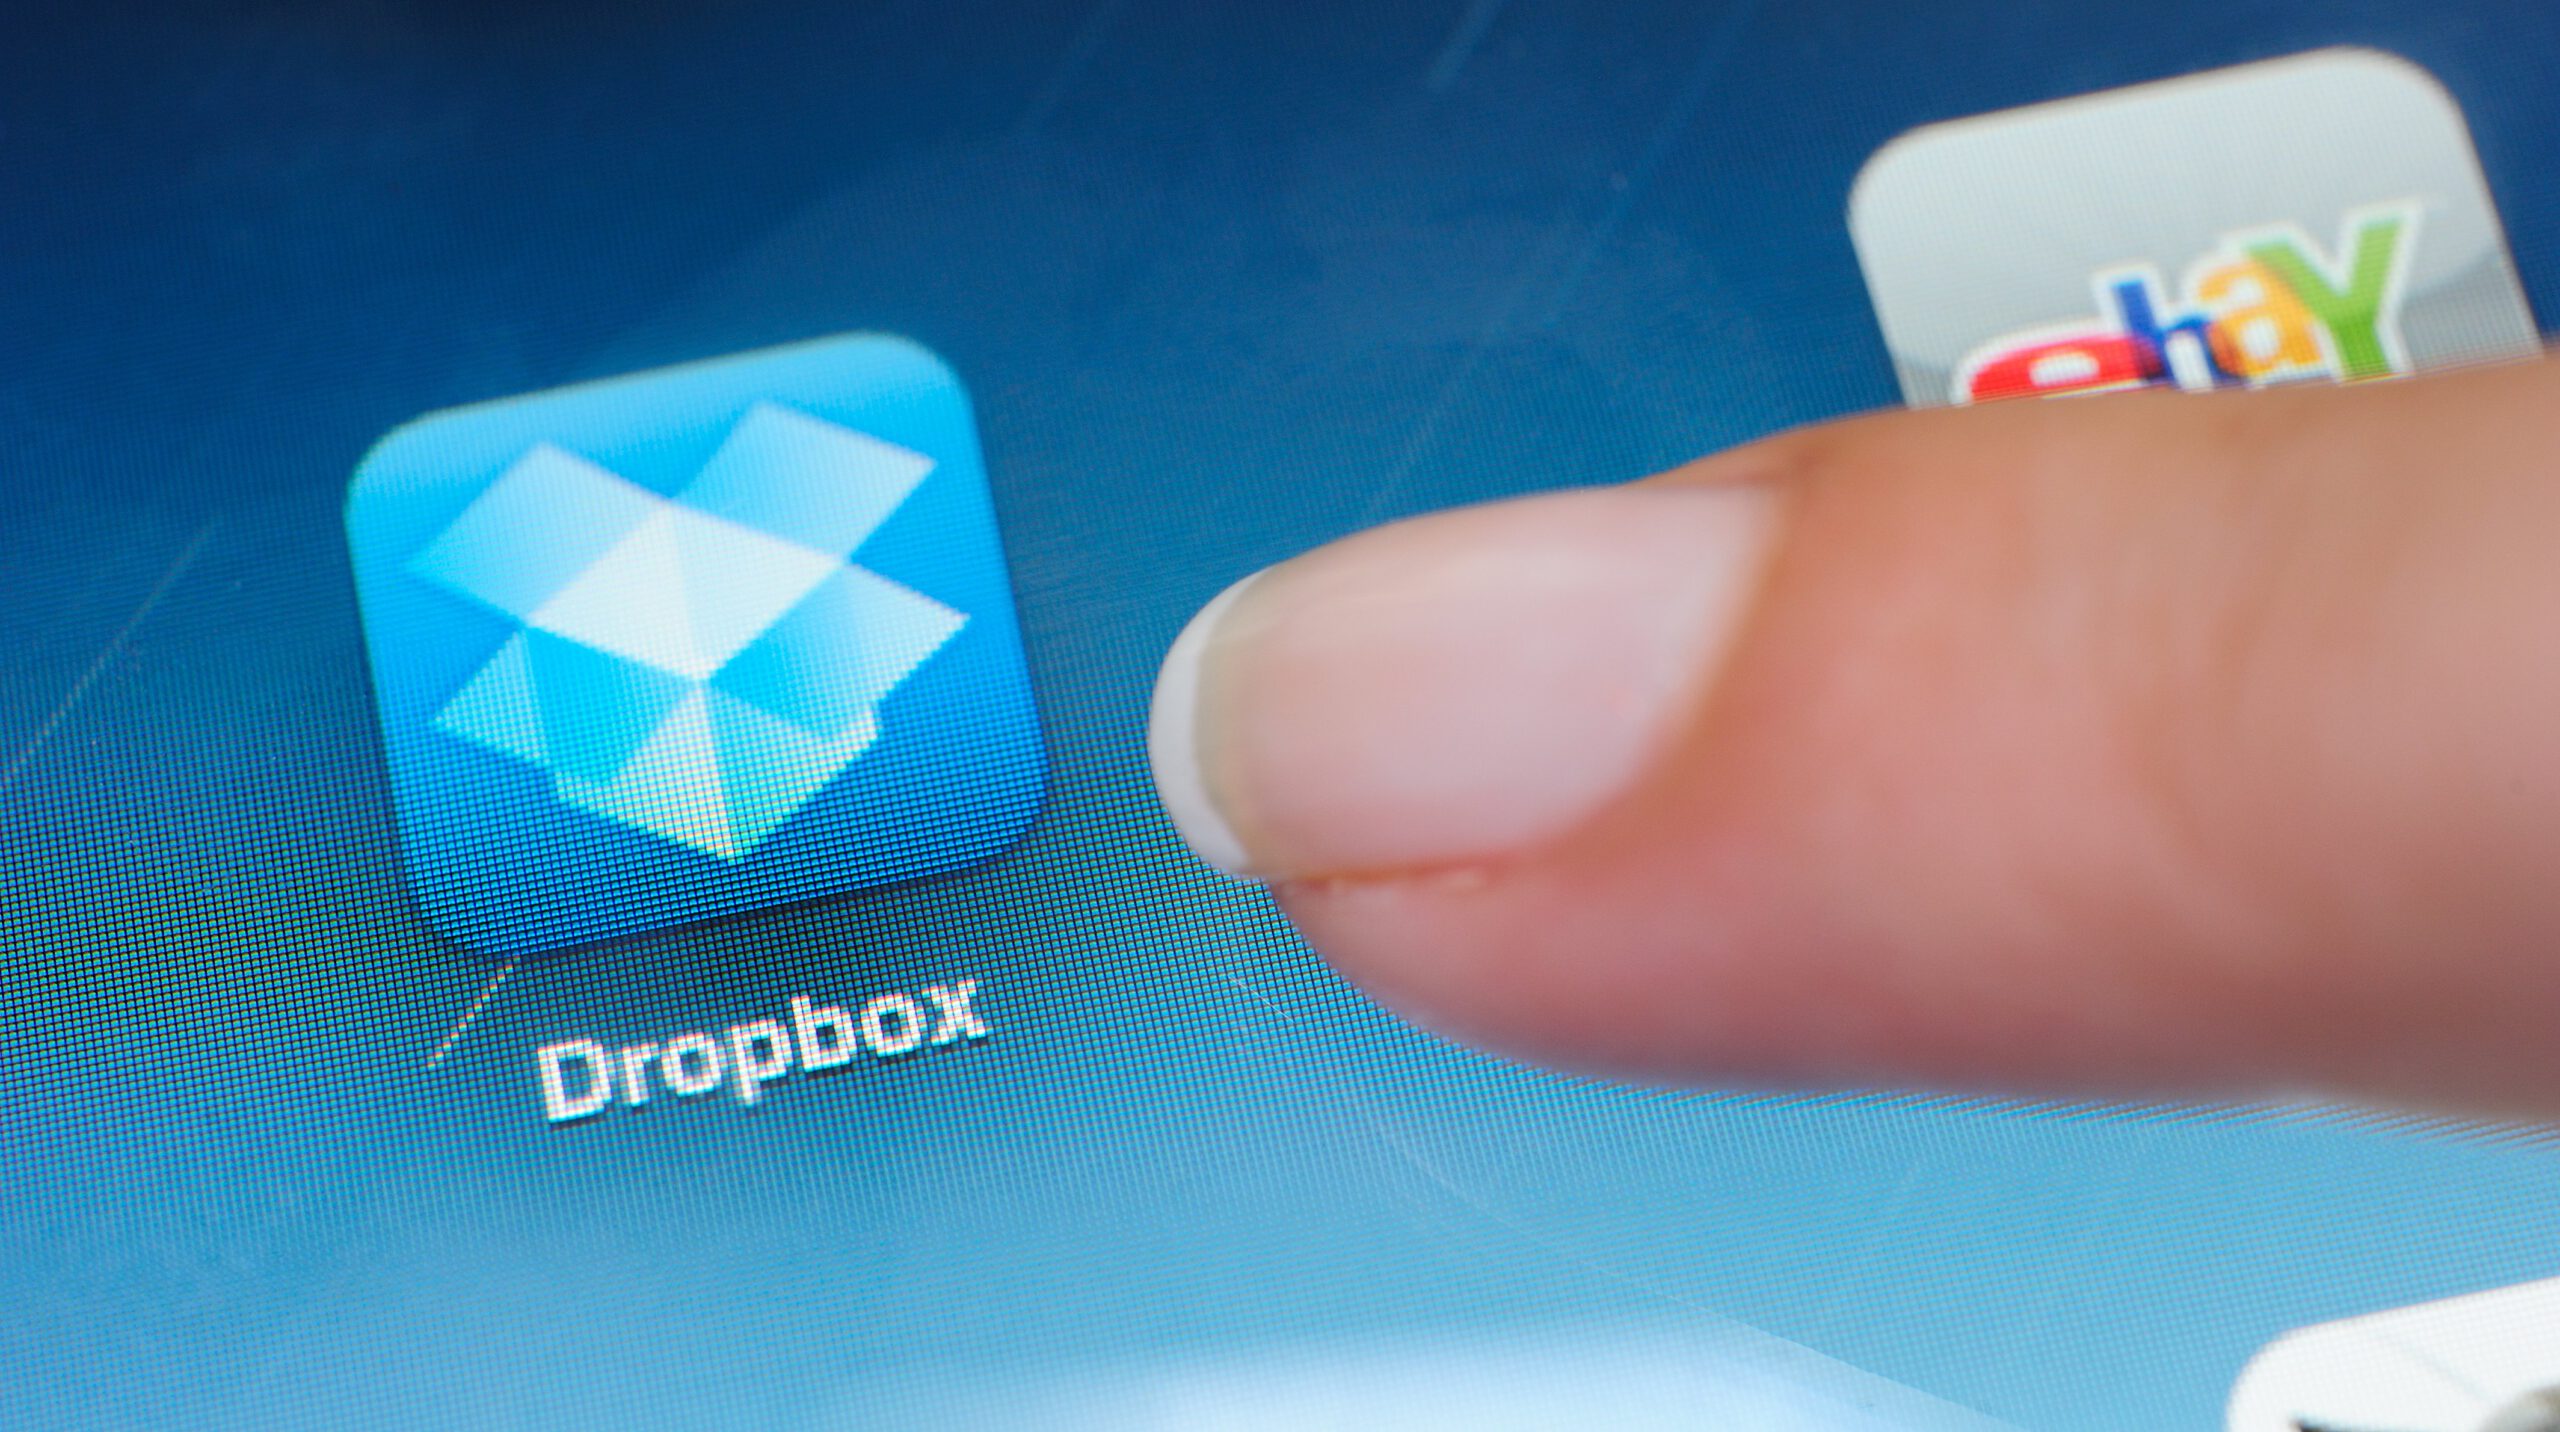  Macro image of touching the Dropbox icon on iPad screen. Dropbox is a Web-based file hosting service operated by Dropbo